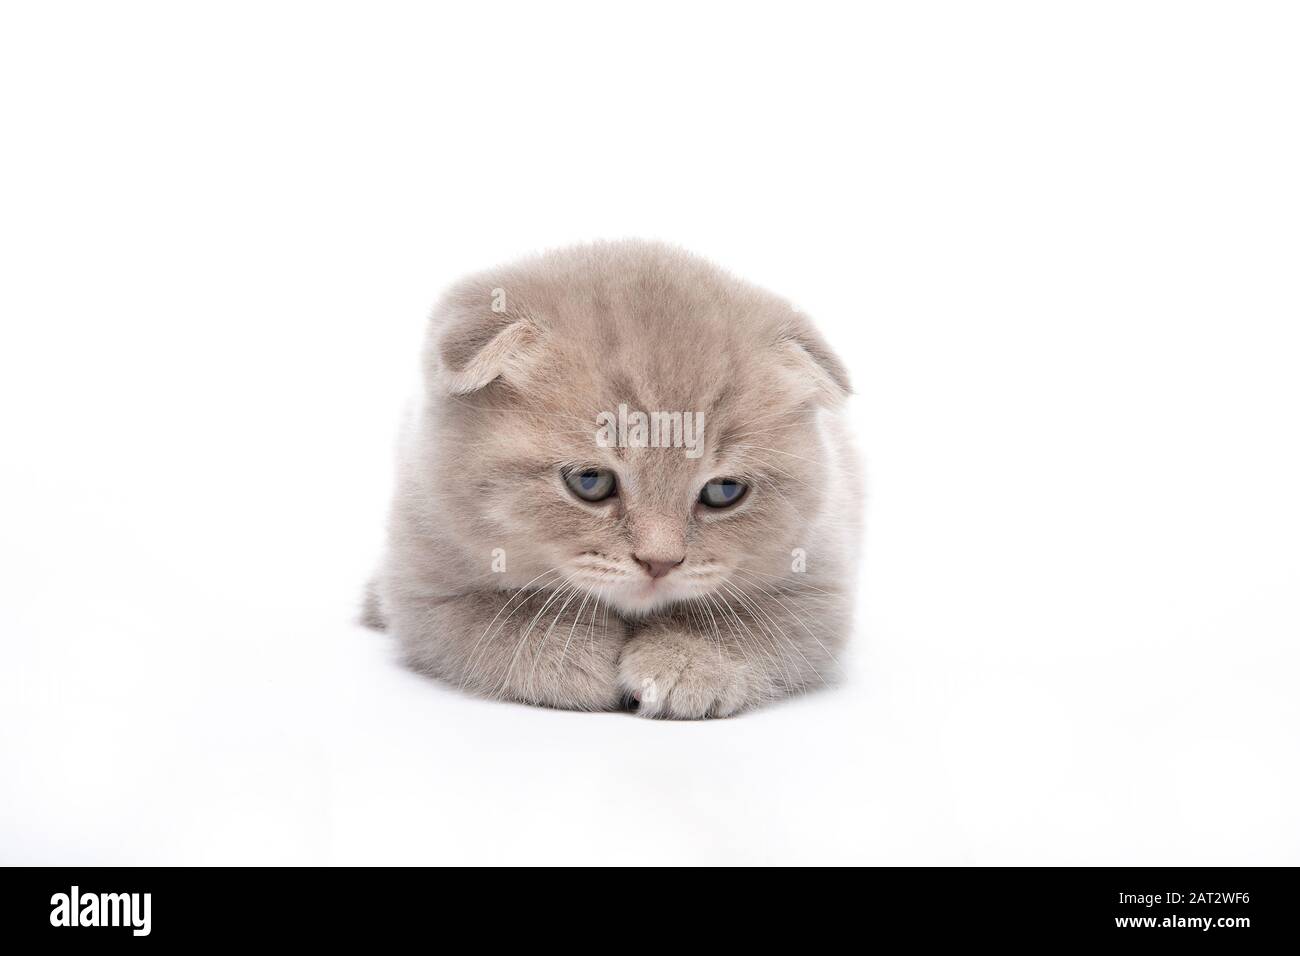 Red kitten lies on a white background Stock Photo